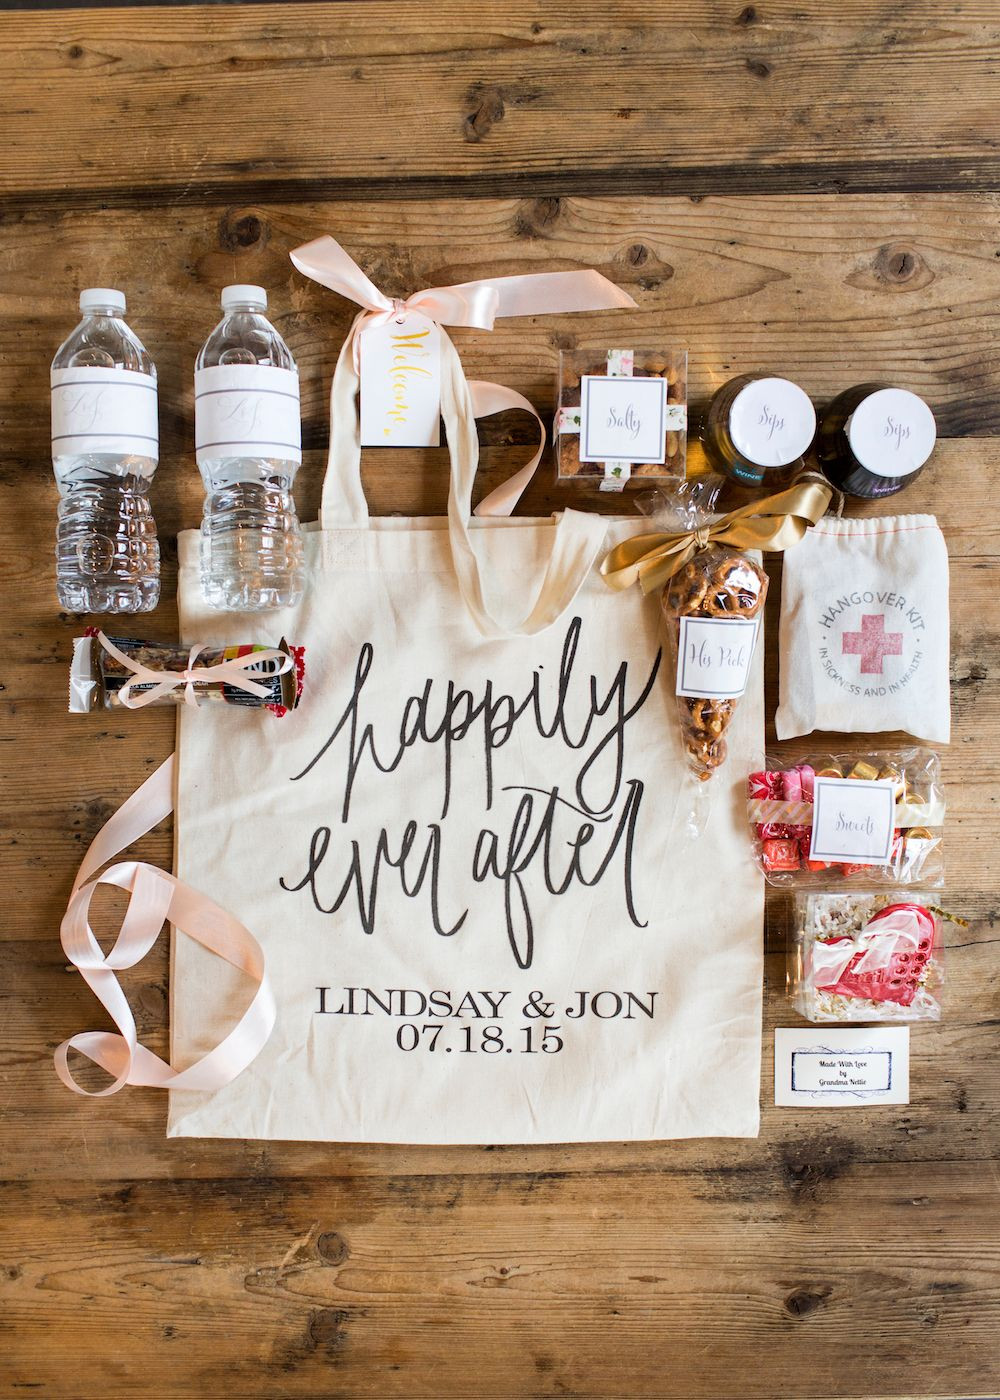 Wedding Guest Gift Ideas
 Wedding Wednesday What We Put in Our Wedding Wel e Bags